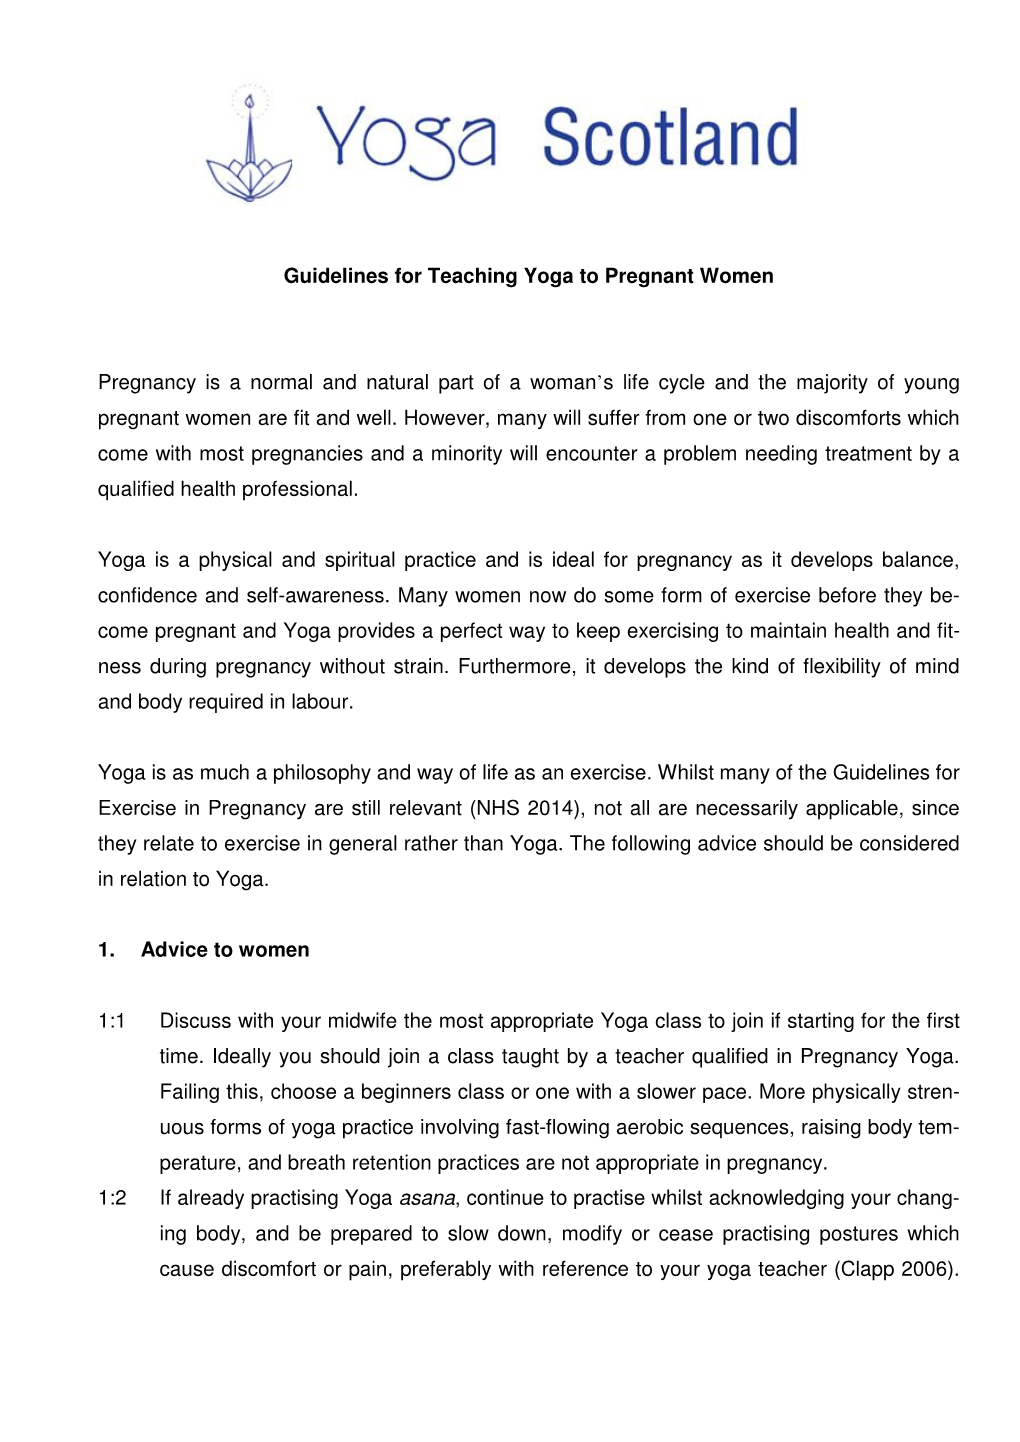 Guidelines for Teaching Yoga to Pregnant Women